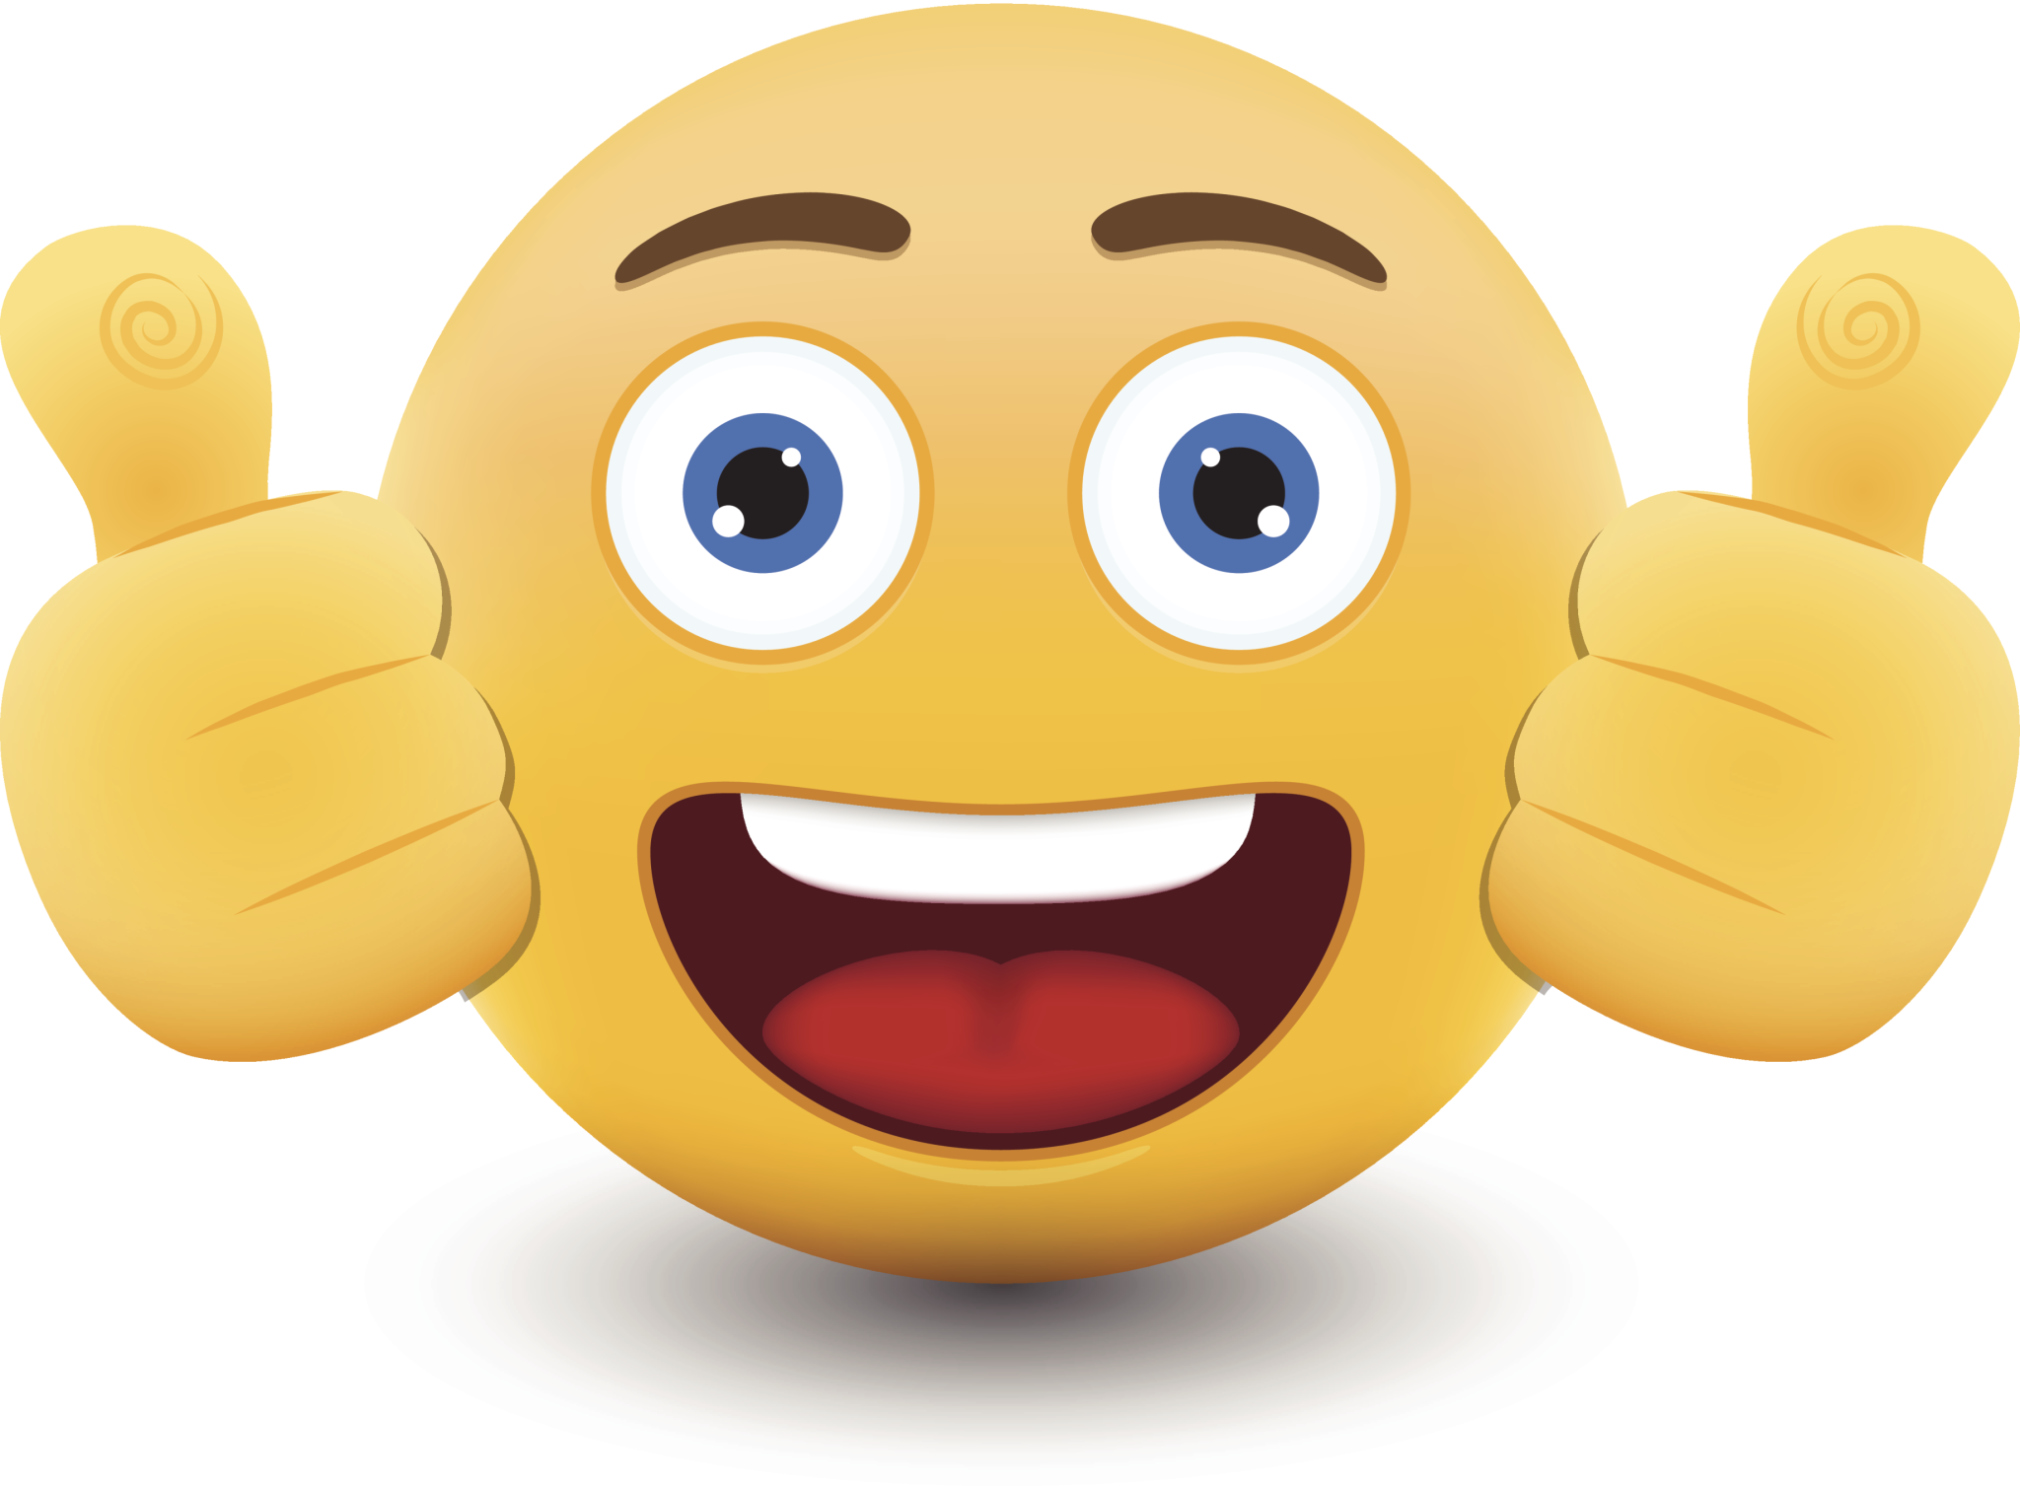 Other Wallpaper: Happy Face Emoji Wallpaper 1080p with High ...